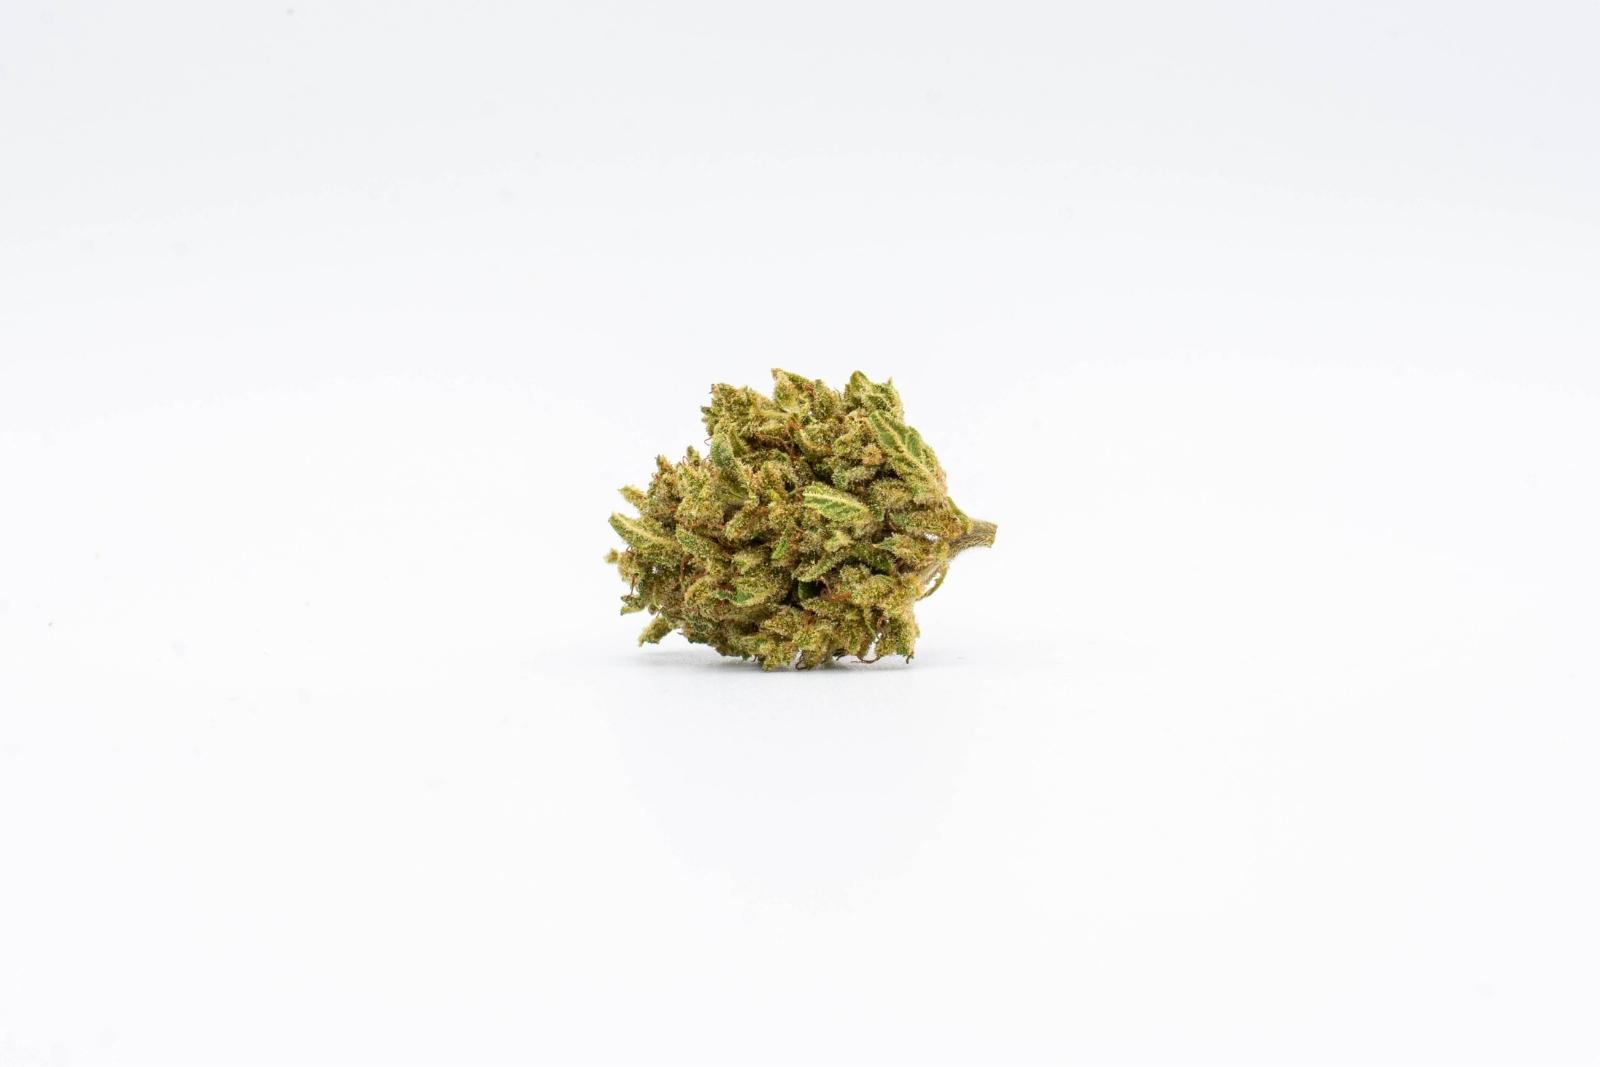 A single nug of Sour Pineapple hemp flower by East Fork Cultivars, on a white background